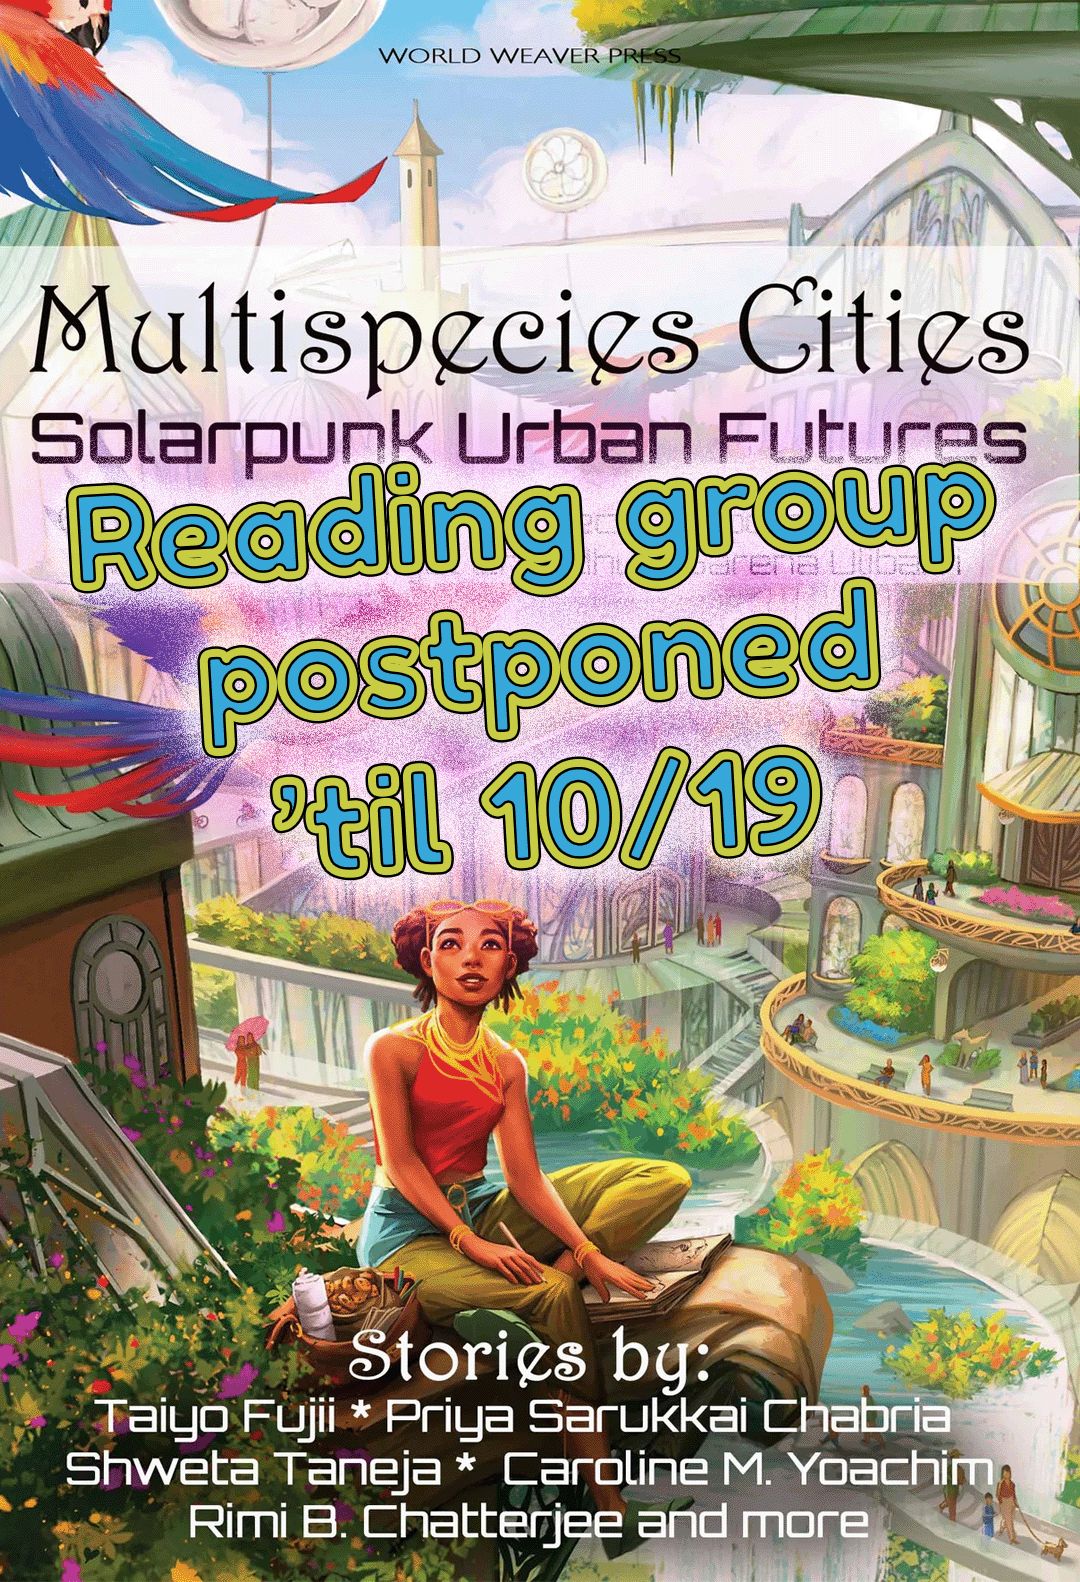 Cover of the book "Multispecies Cities" with the following text overlaid: Reading group postponed 'til 10/19